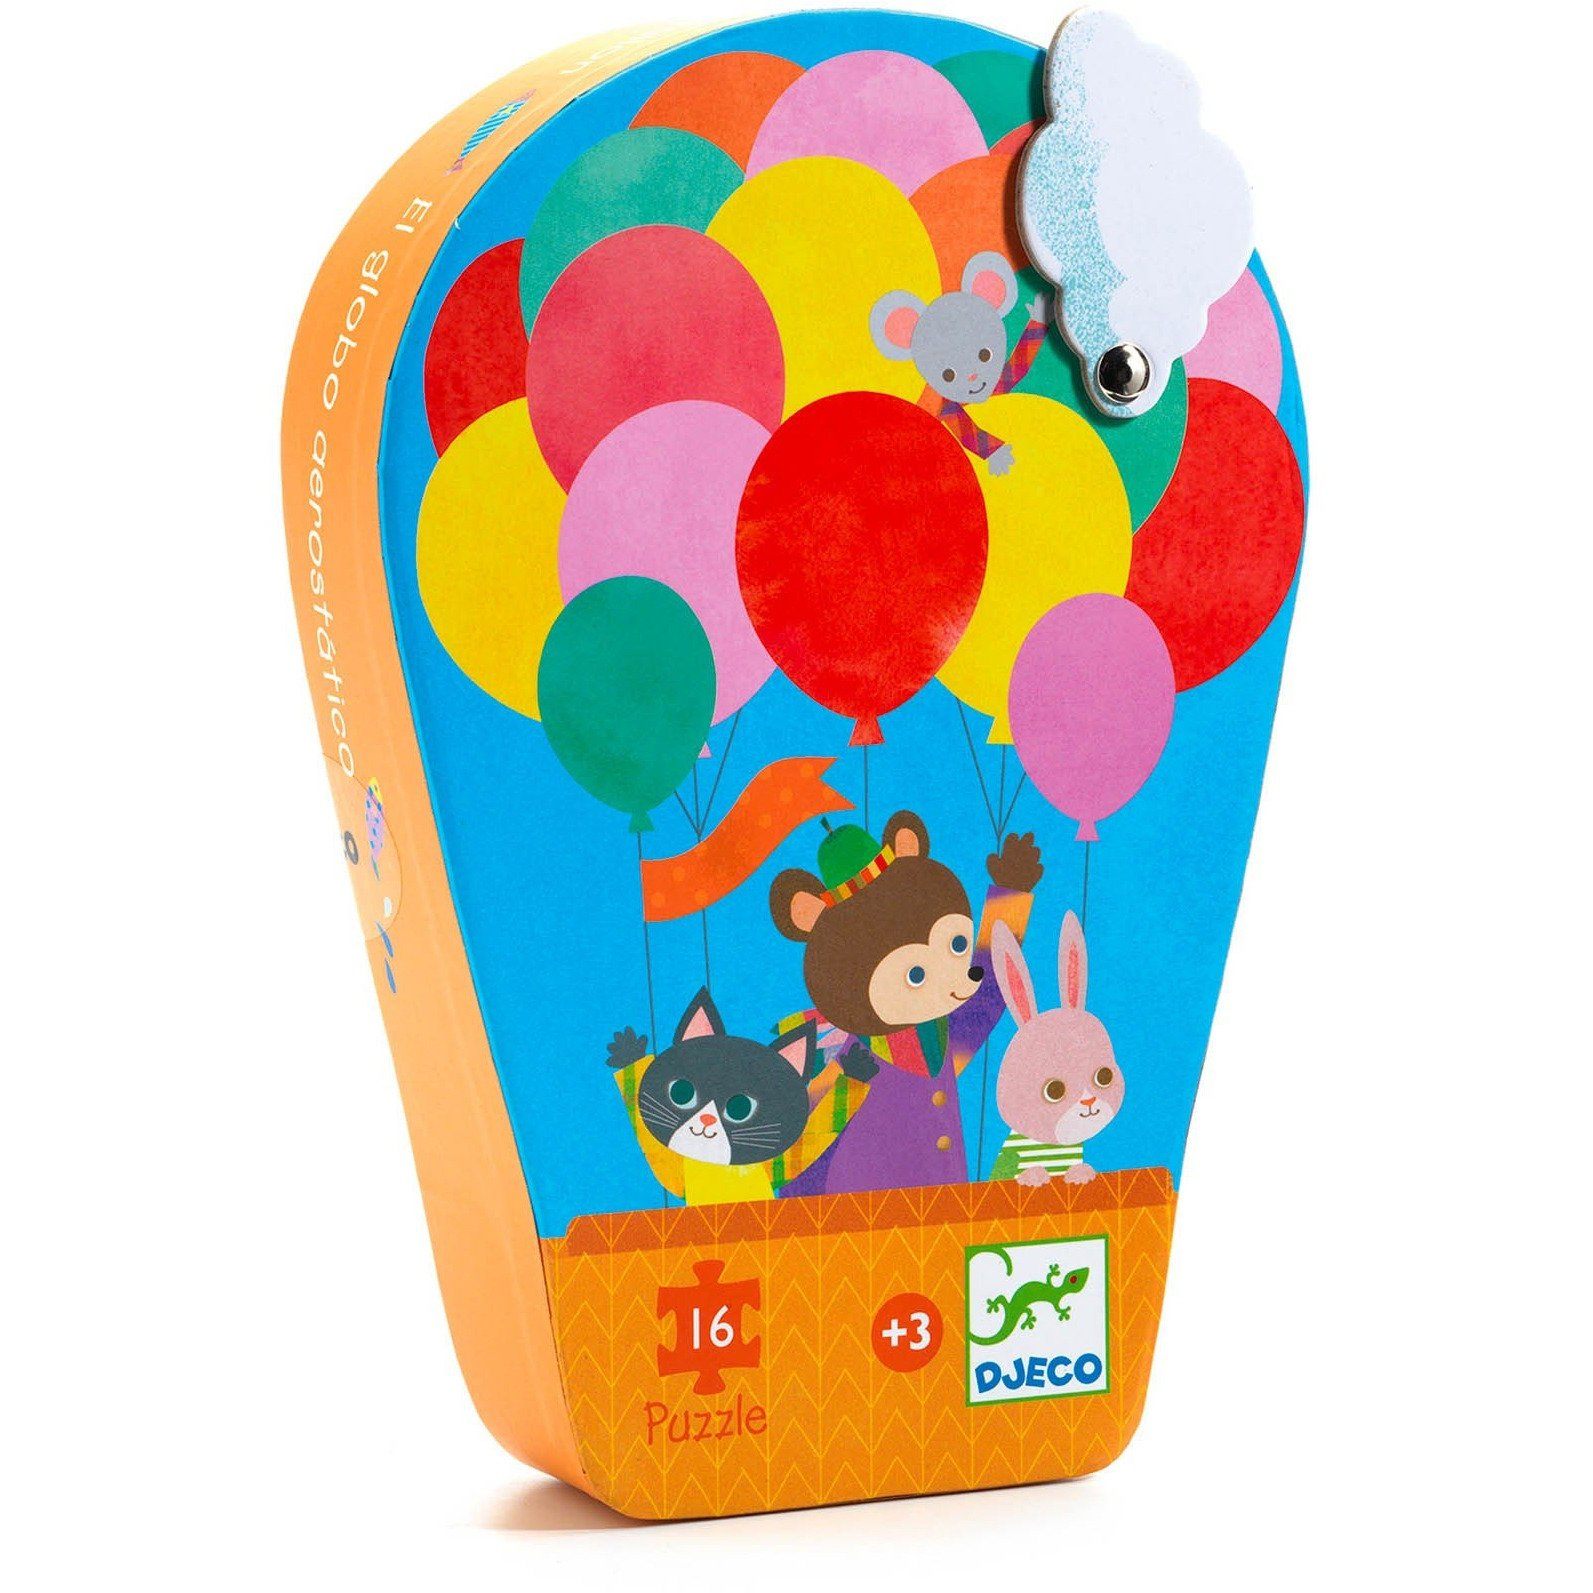 Brightly colored puzzle featuring 4 animal friends on a hot air-ballon ride. Pictured is the storage box in the shape of the hot-air balloon